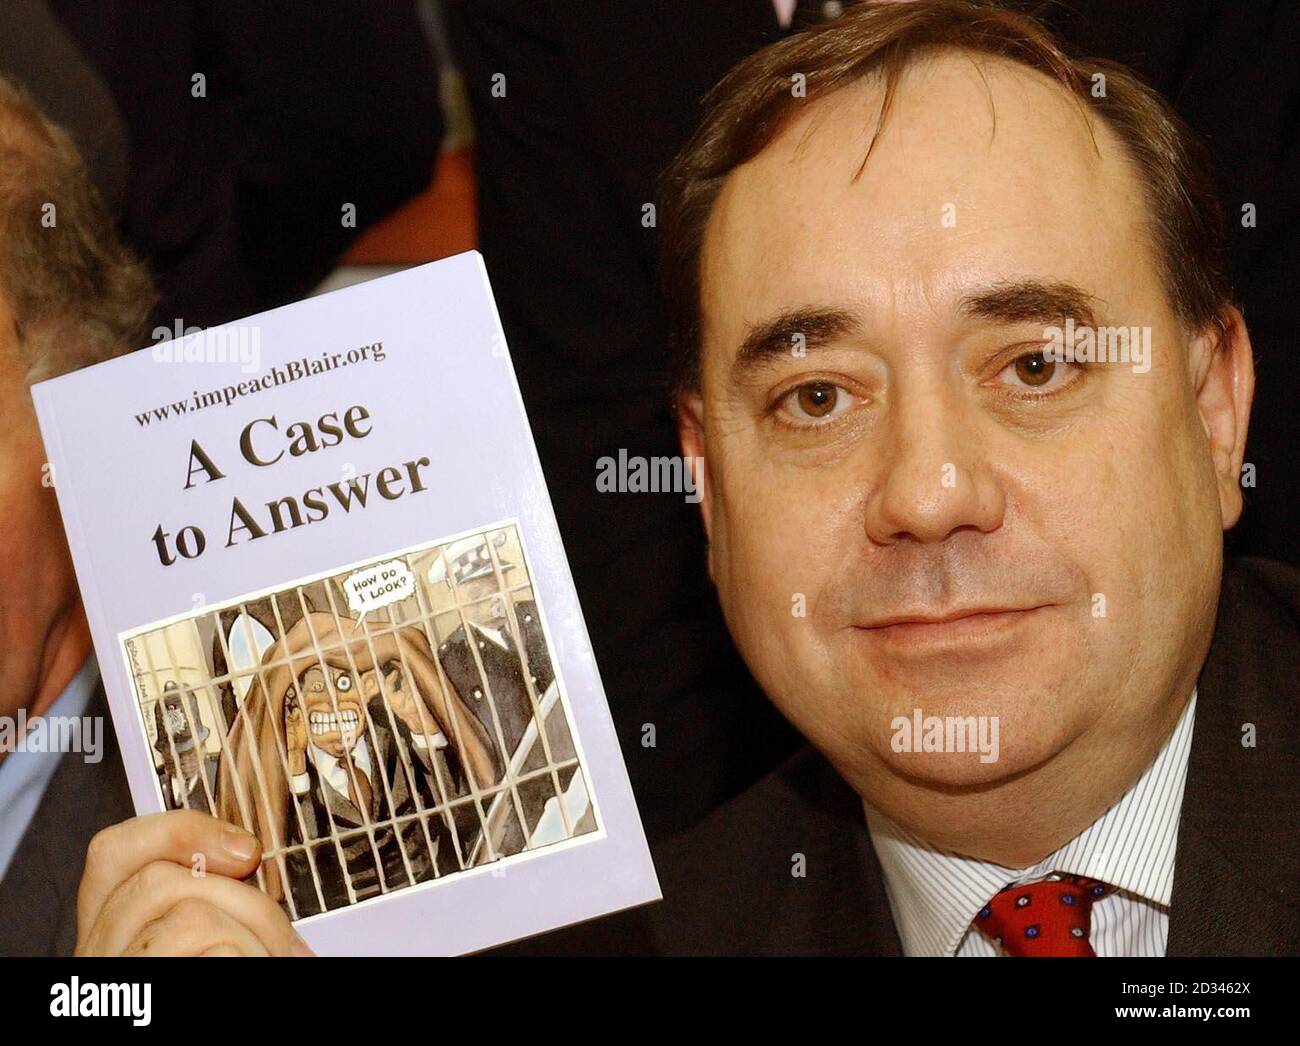 Alex Salmond, speaks to the media during a press conference, where celebrity anti-war campaigners and MP's called for Tony Blair's impeachment.  Some 23 MPs have signed a Commons motion calling for the Prime Minister to be thrown out of office for 'gross misconduct'.  Author Iain Banks, playwright Harold Pinter and musician Brian Eno are due to join them for a photocall in Parliament. Stock Photo